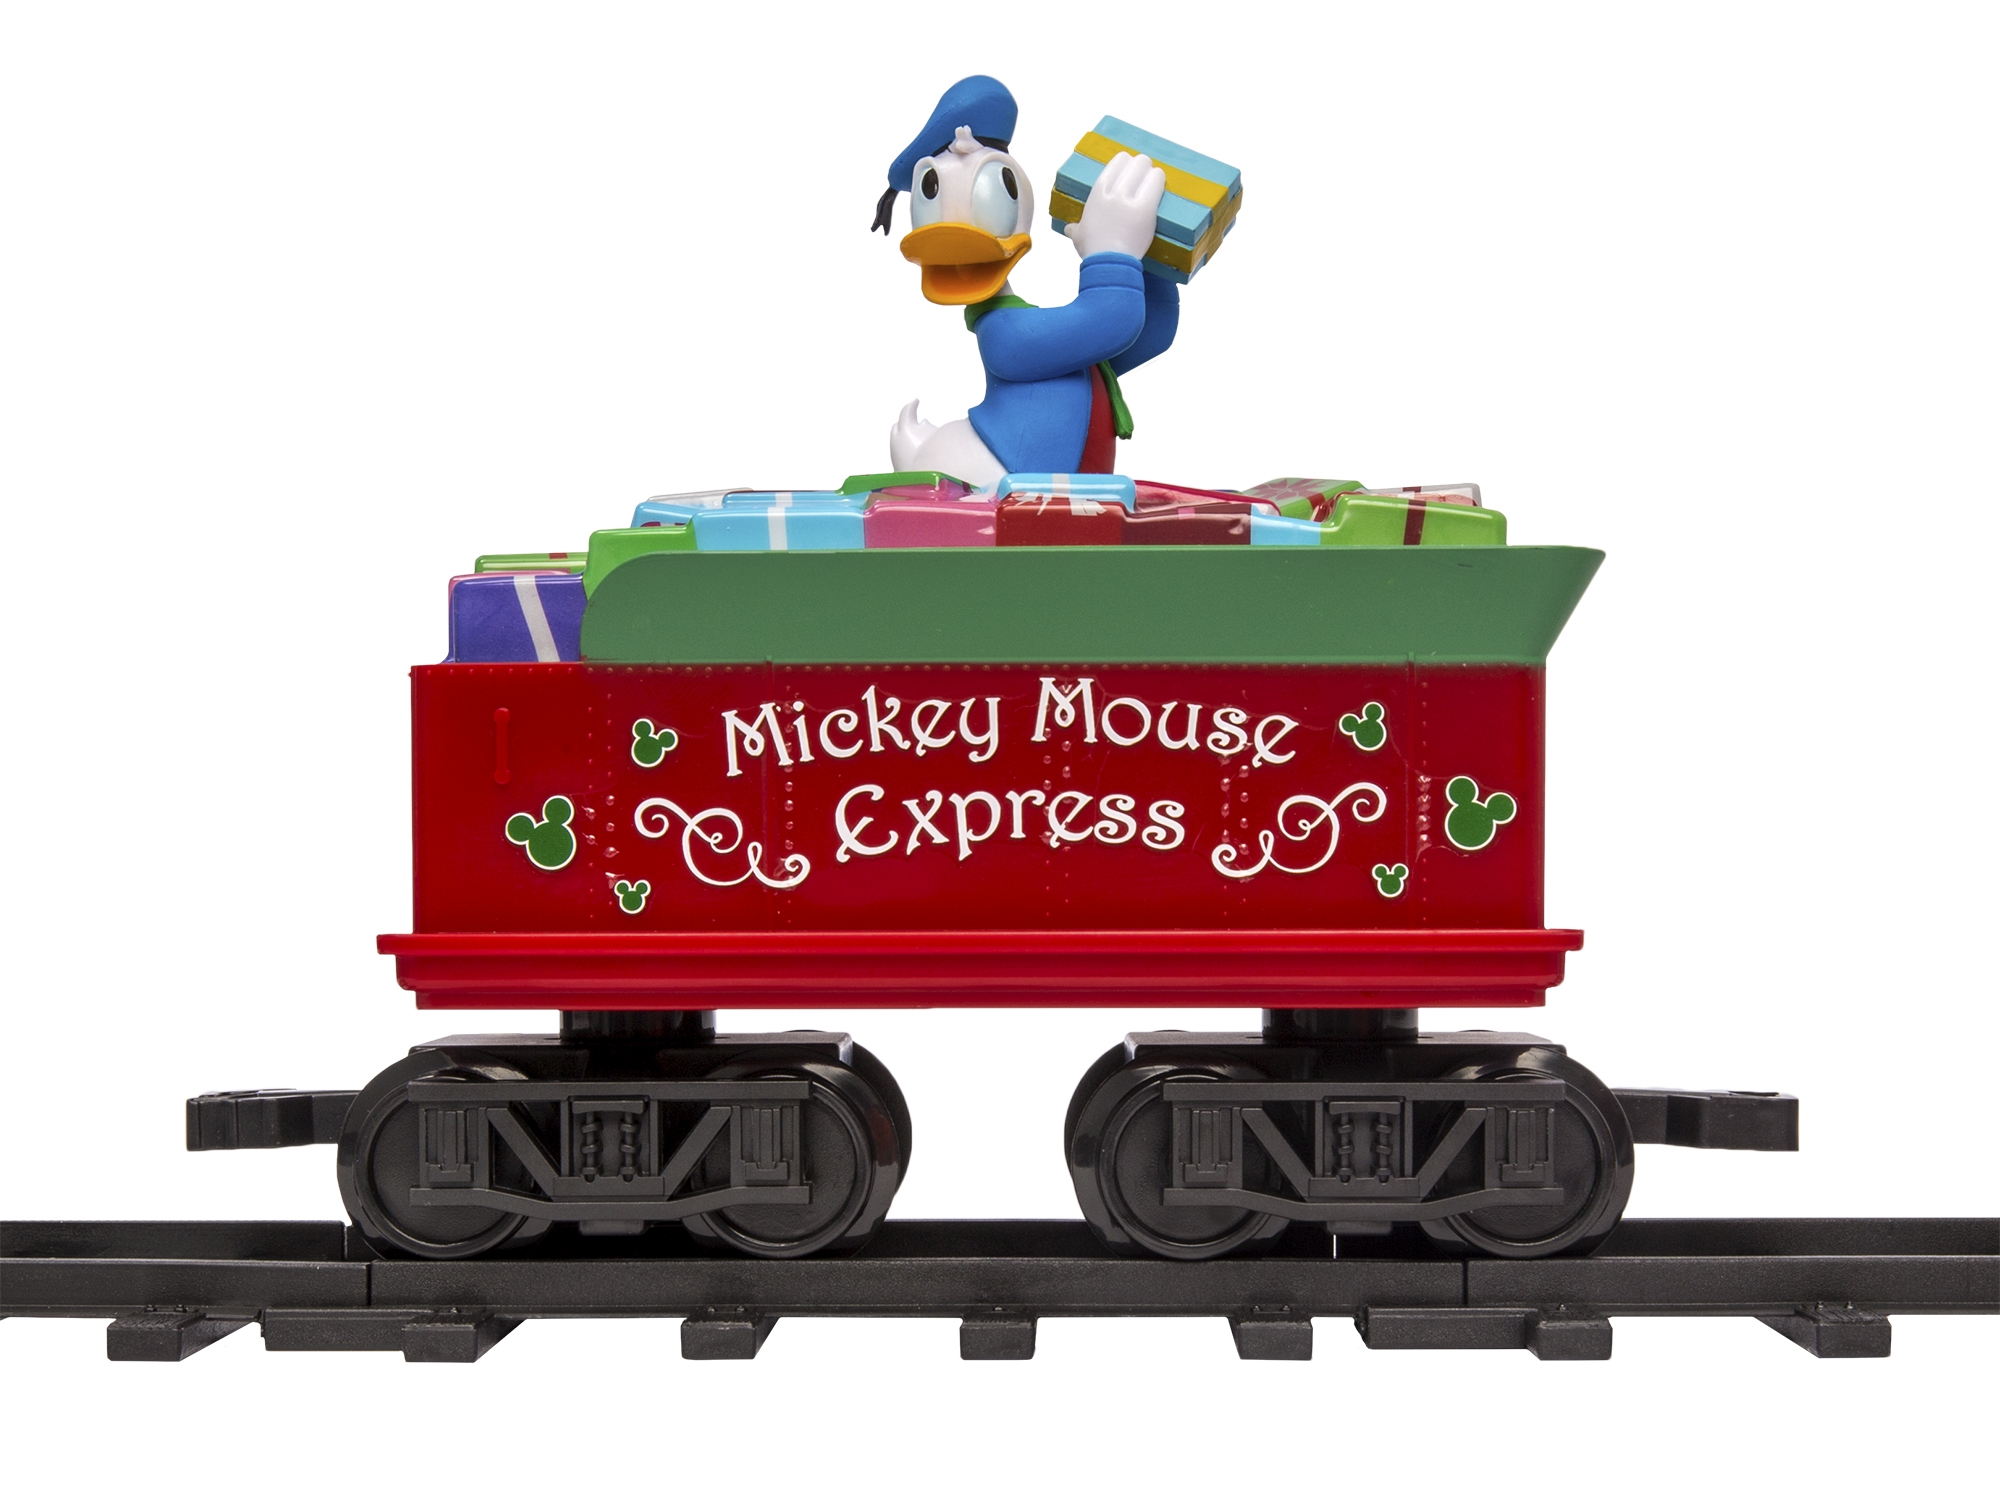 How does the steam engine relate to Mickey Mouse?